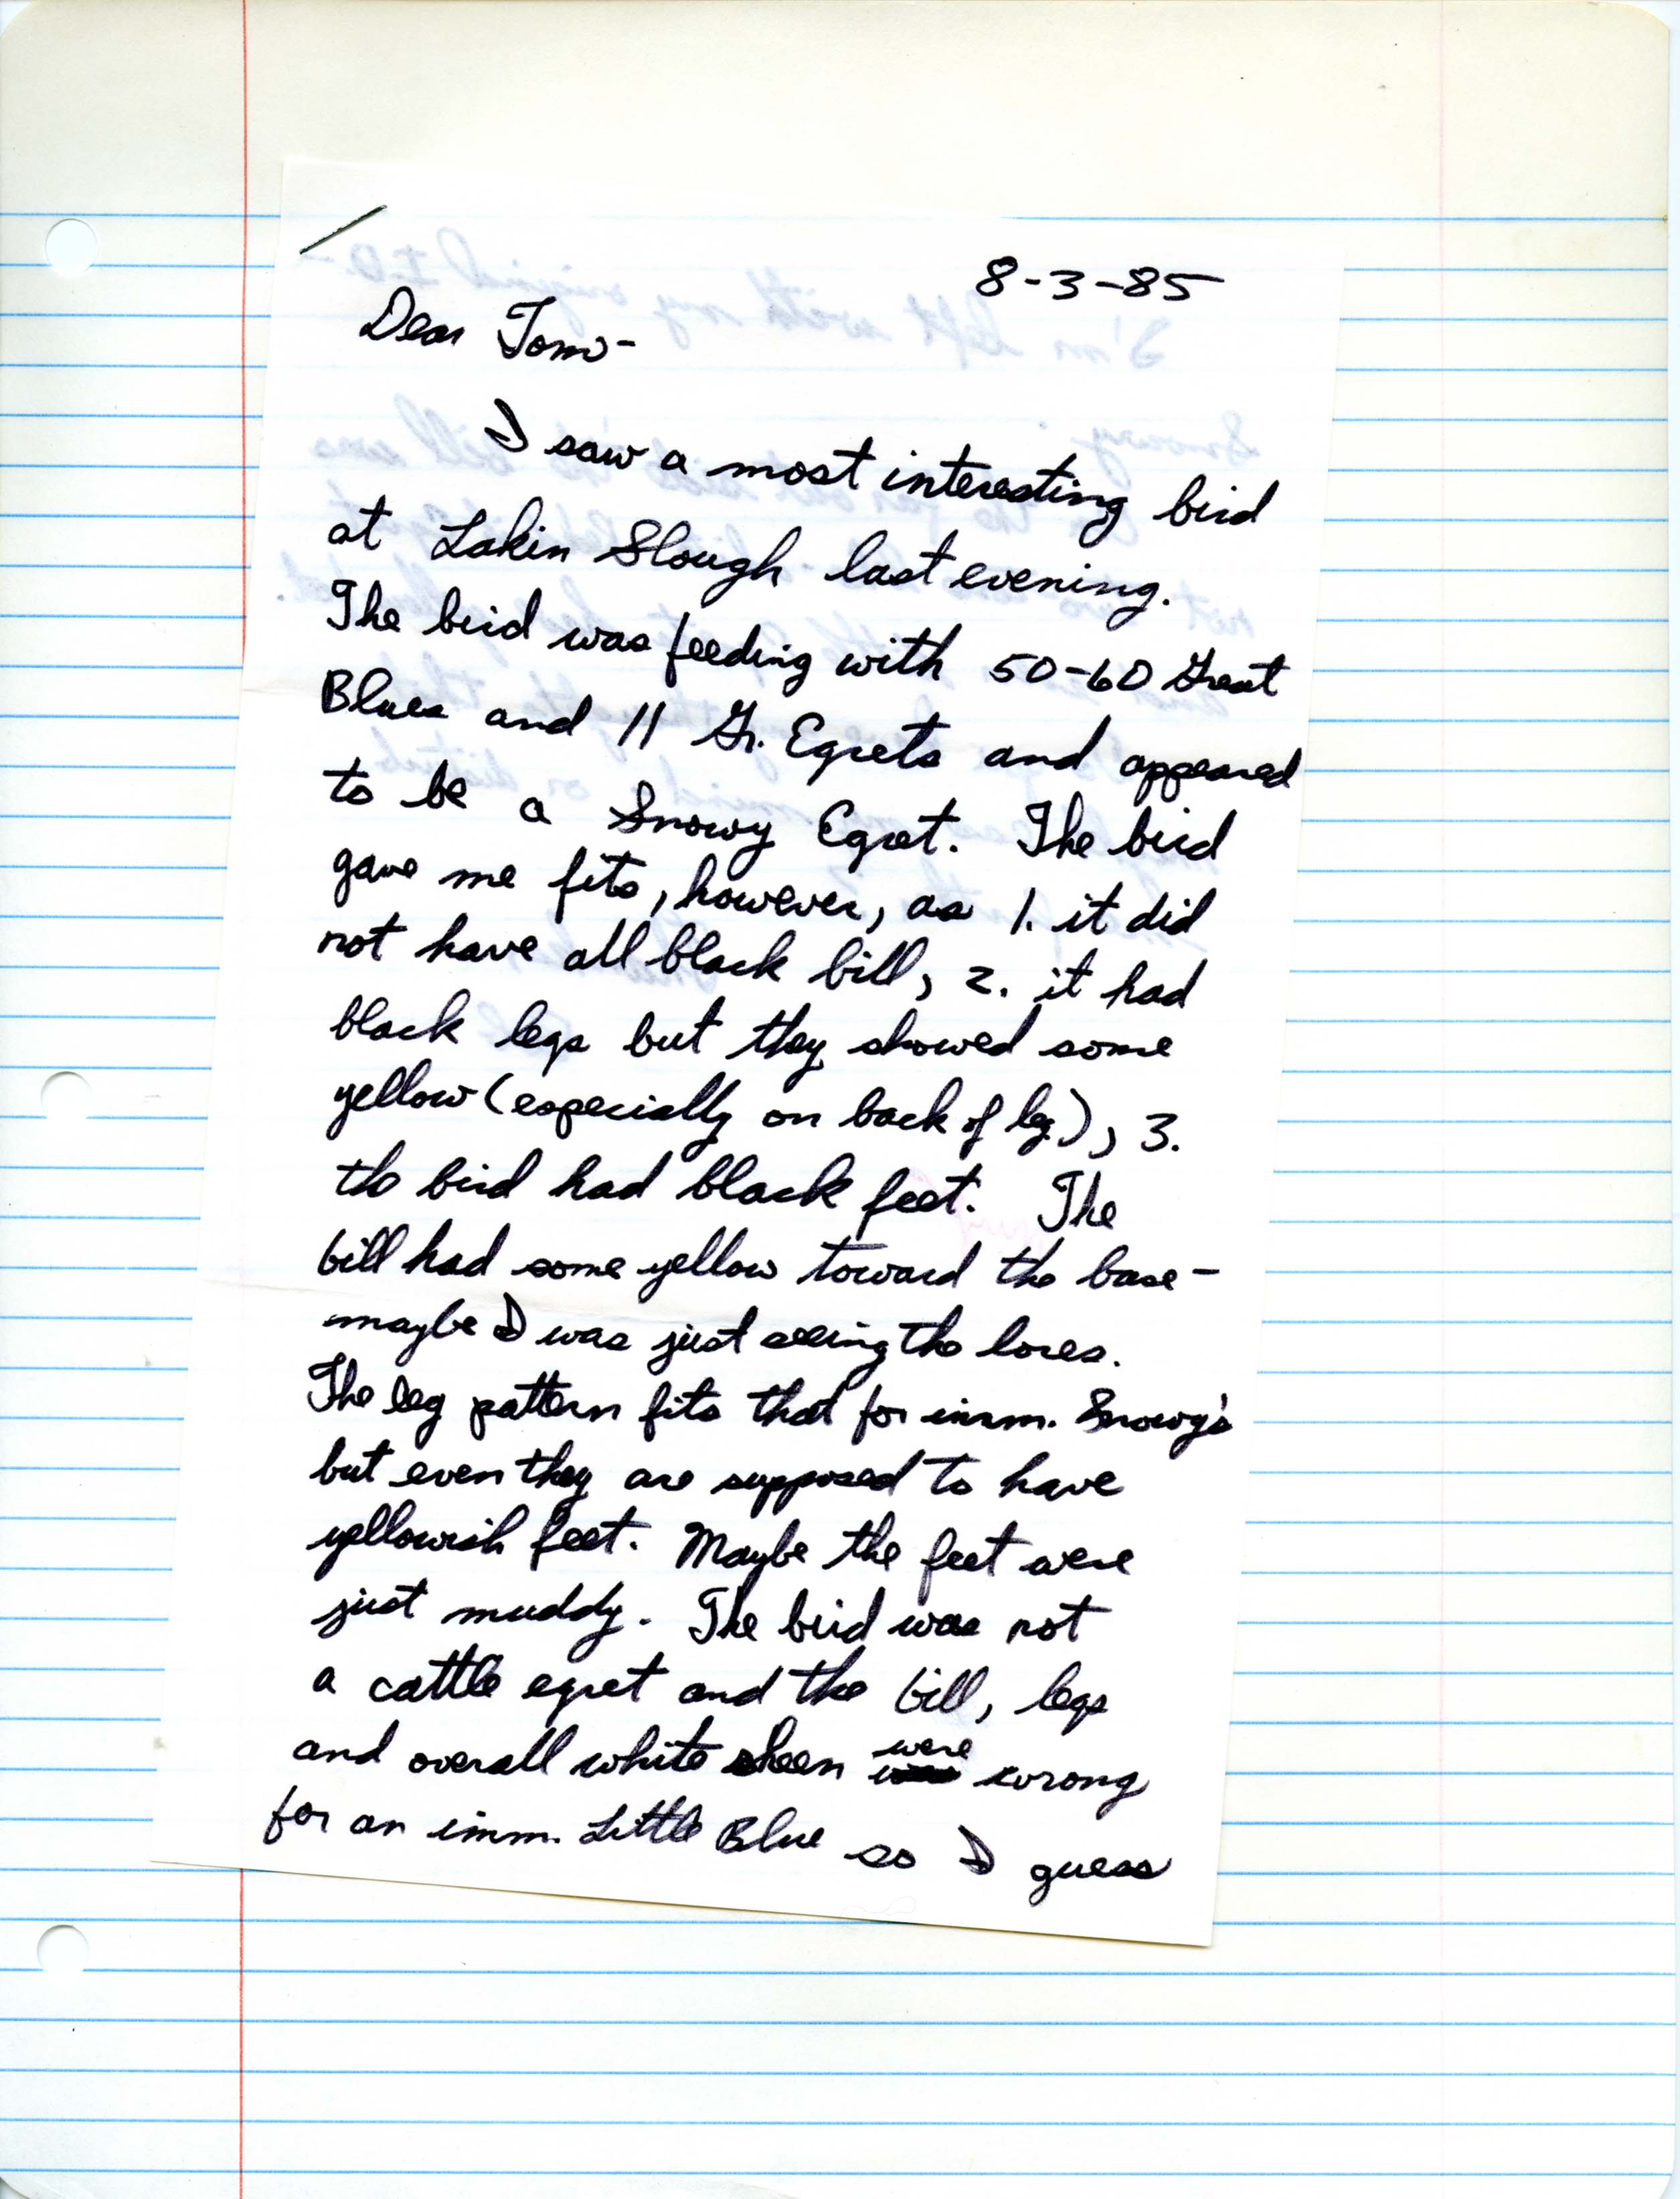 Robert Myers letter to Thomas Kent regarding a Snowy Egret sighting at Lakin Slough, August 8, 1985